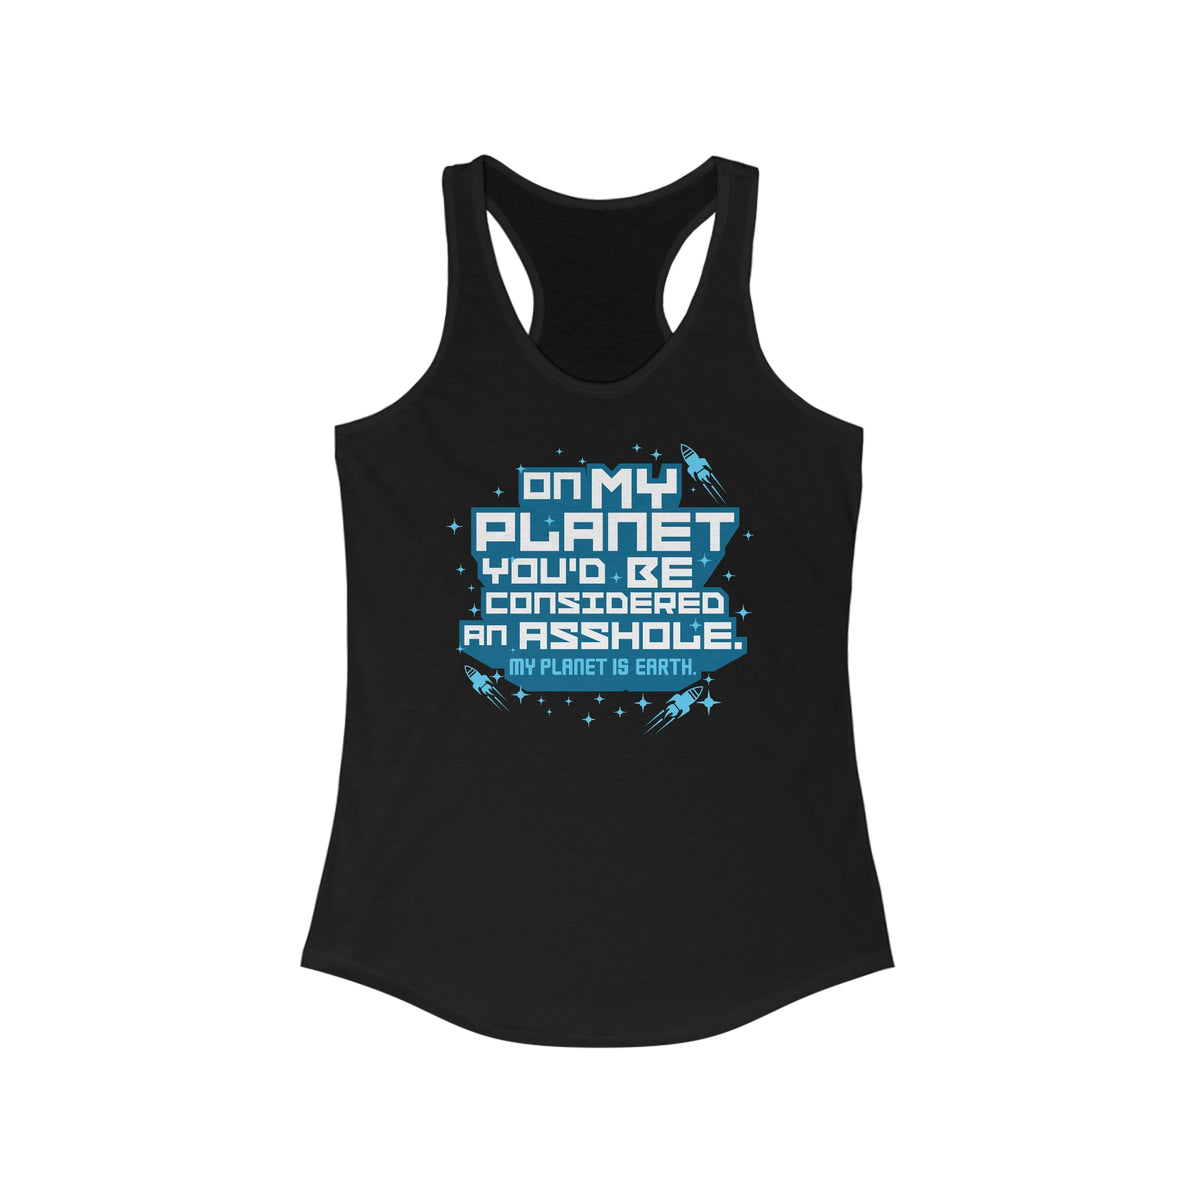 On My Planet You'D Be Considered An Asshole. (My Planet Is Earth) - Women’s Racerback Tank